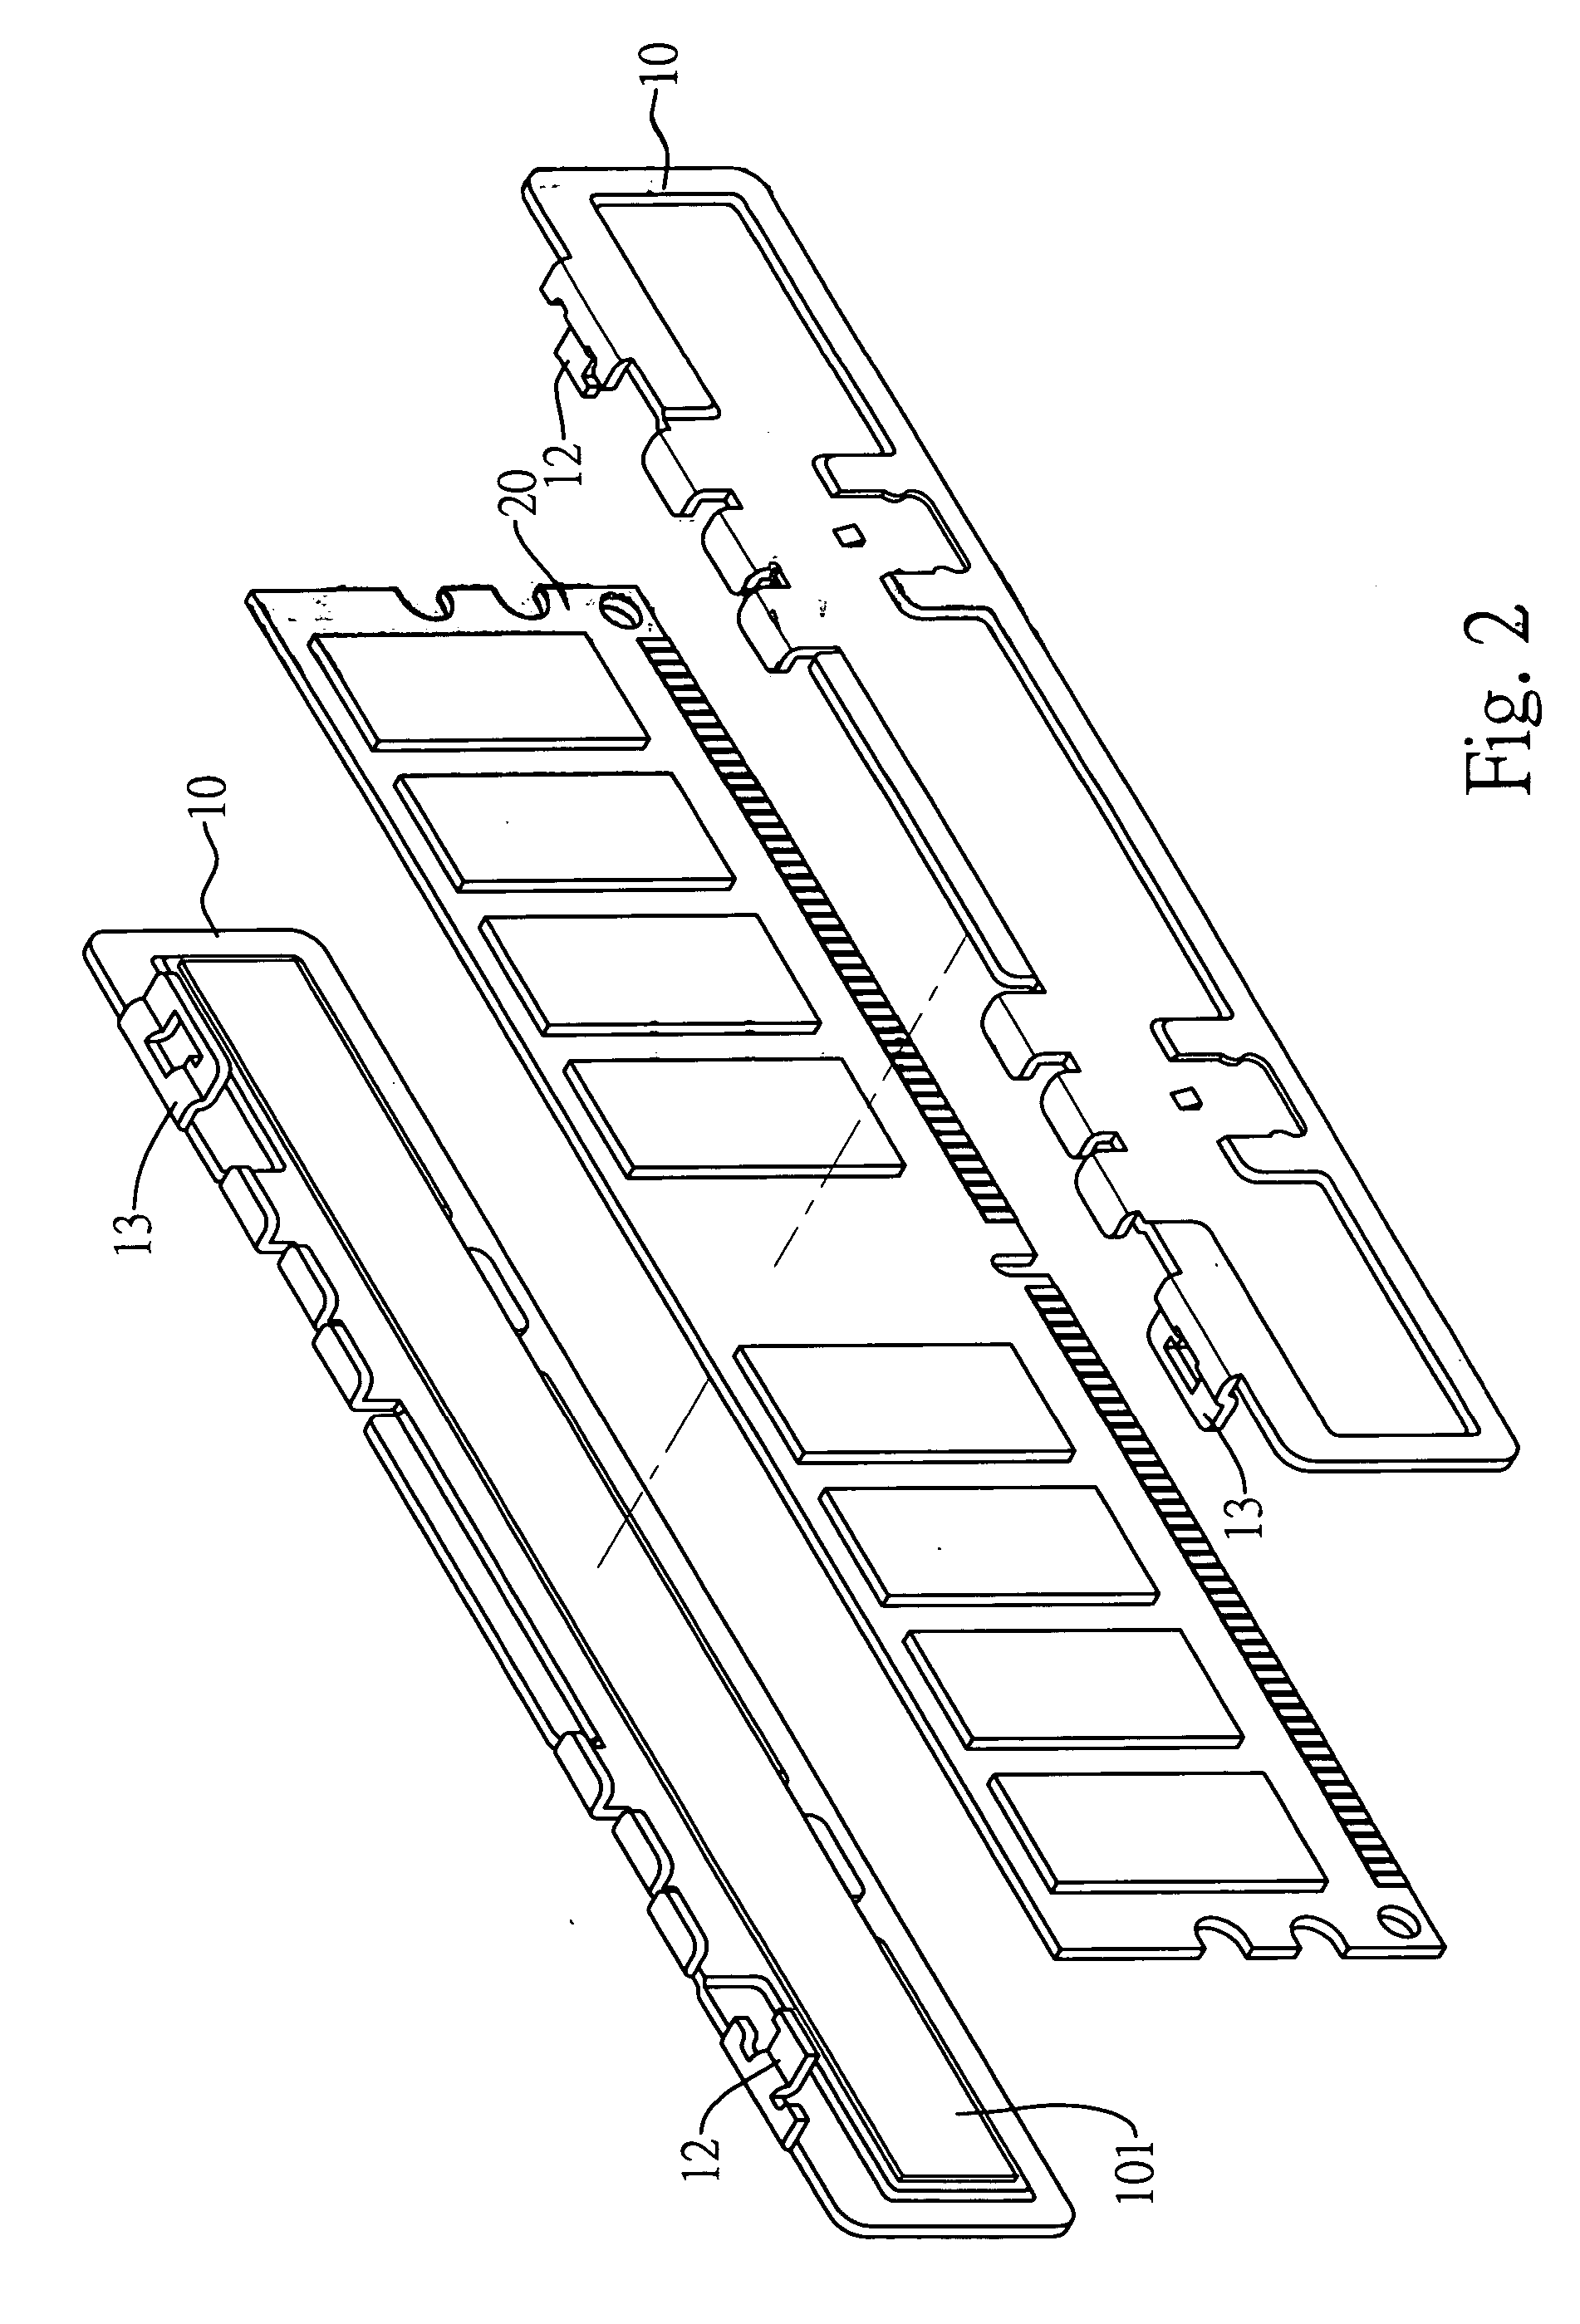 Protecting device of a memory module